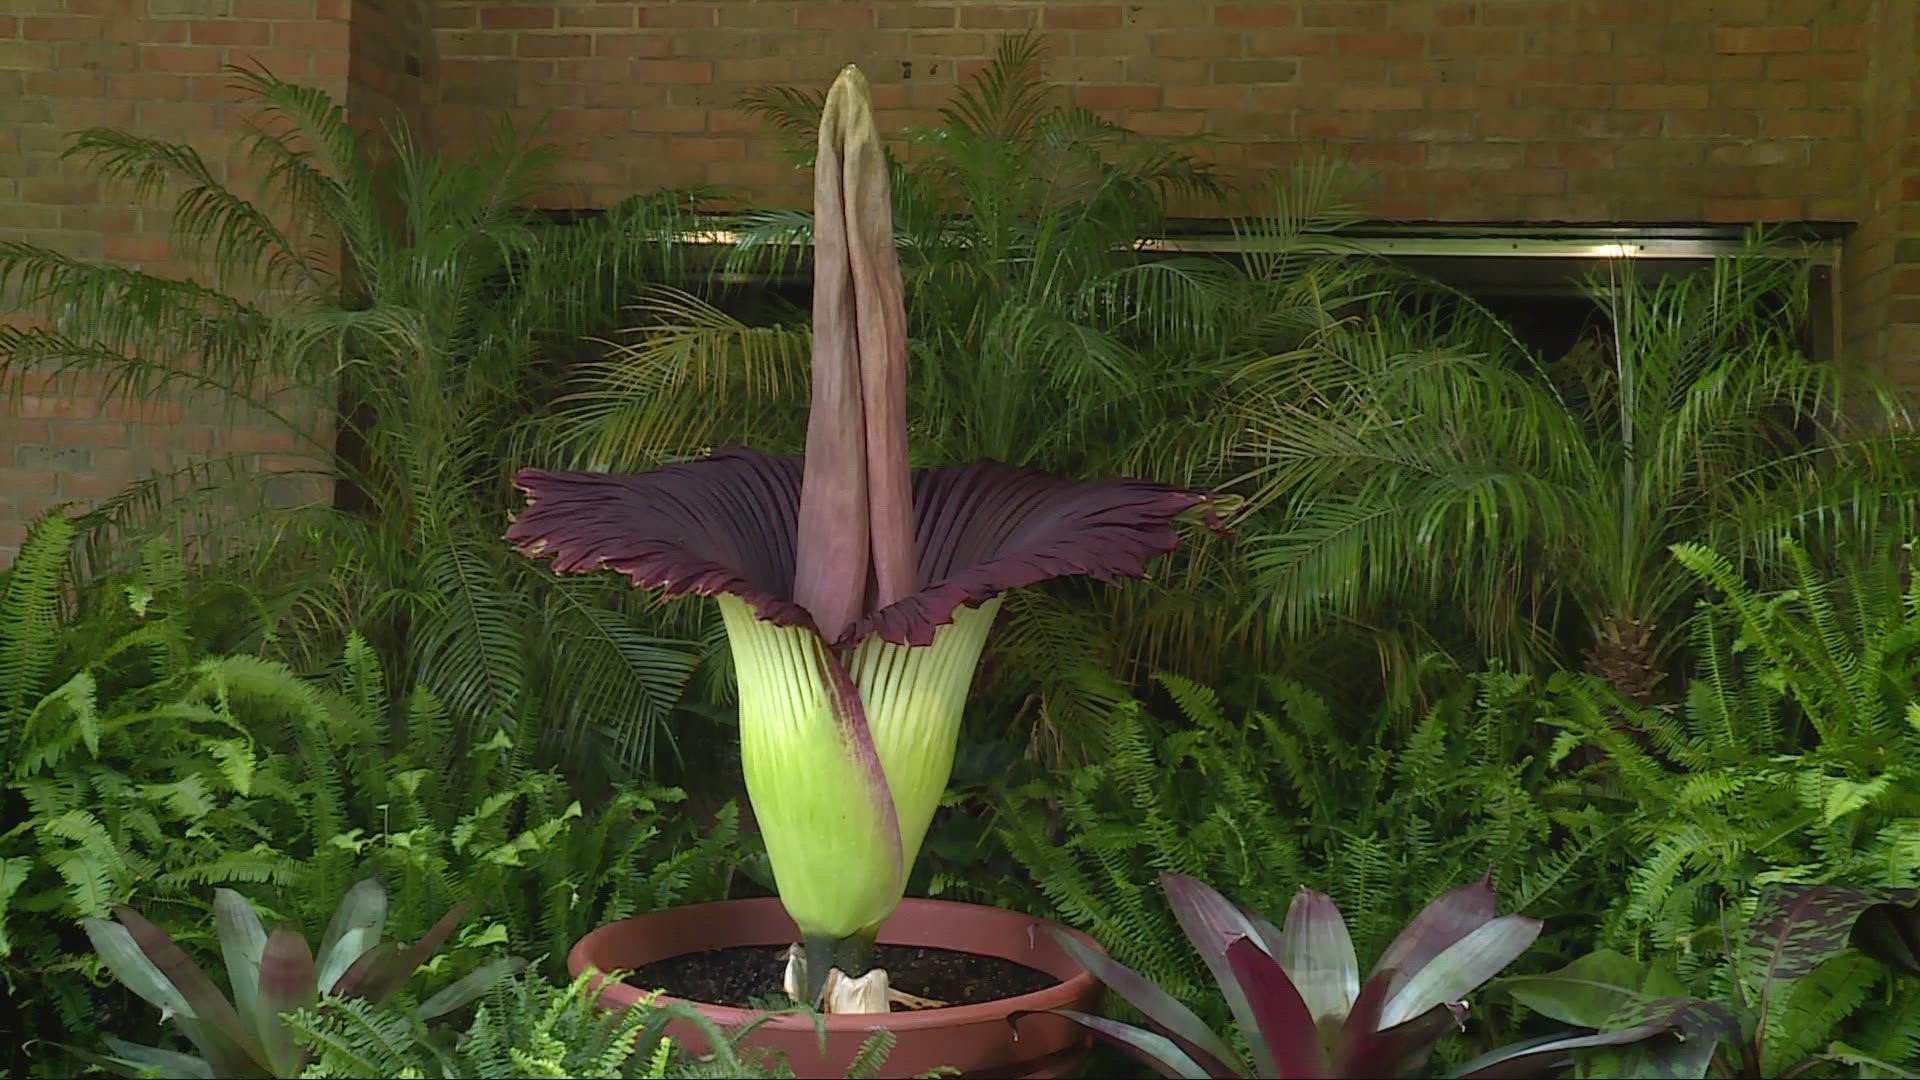 The Cleveland Metroparks Zoo says that their giant titan arum plant, better known as the corpse flower, has started the blooming process.